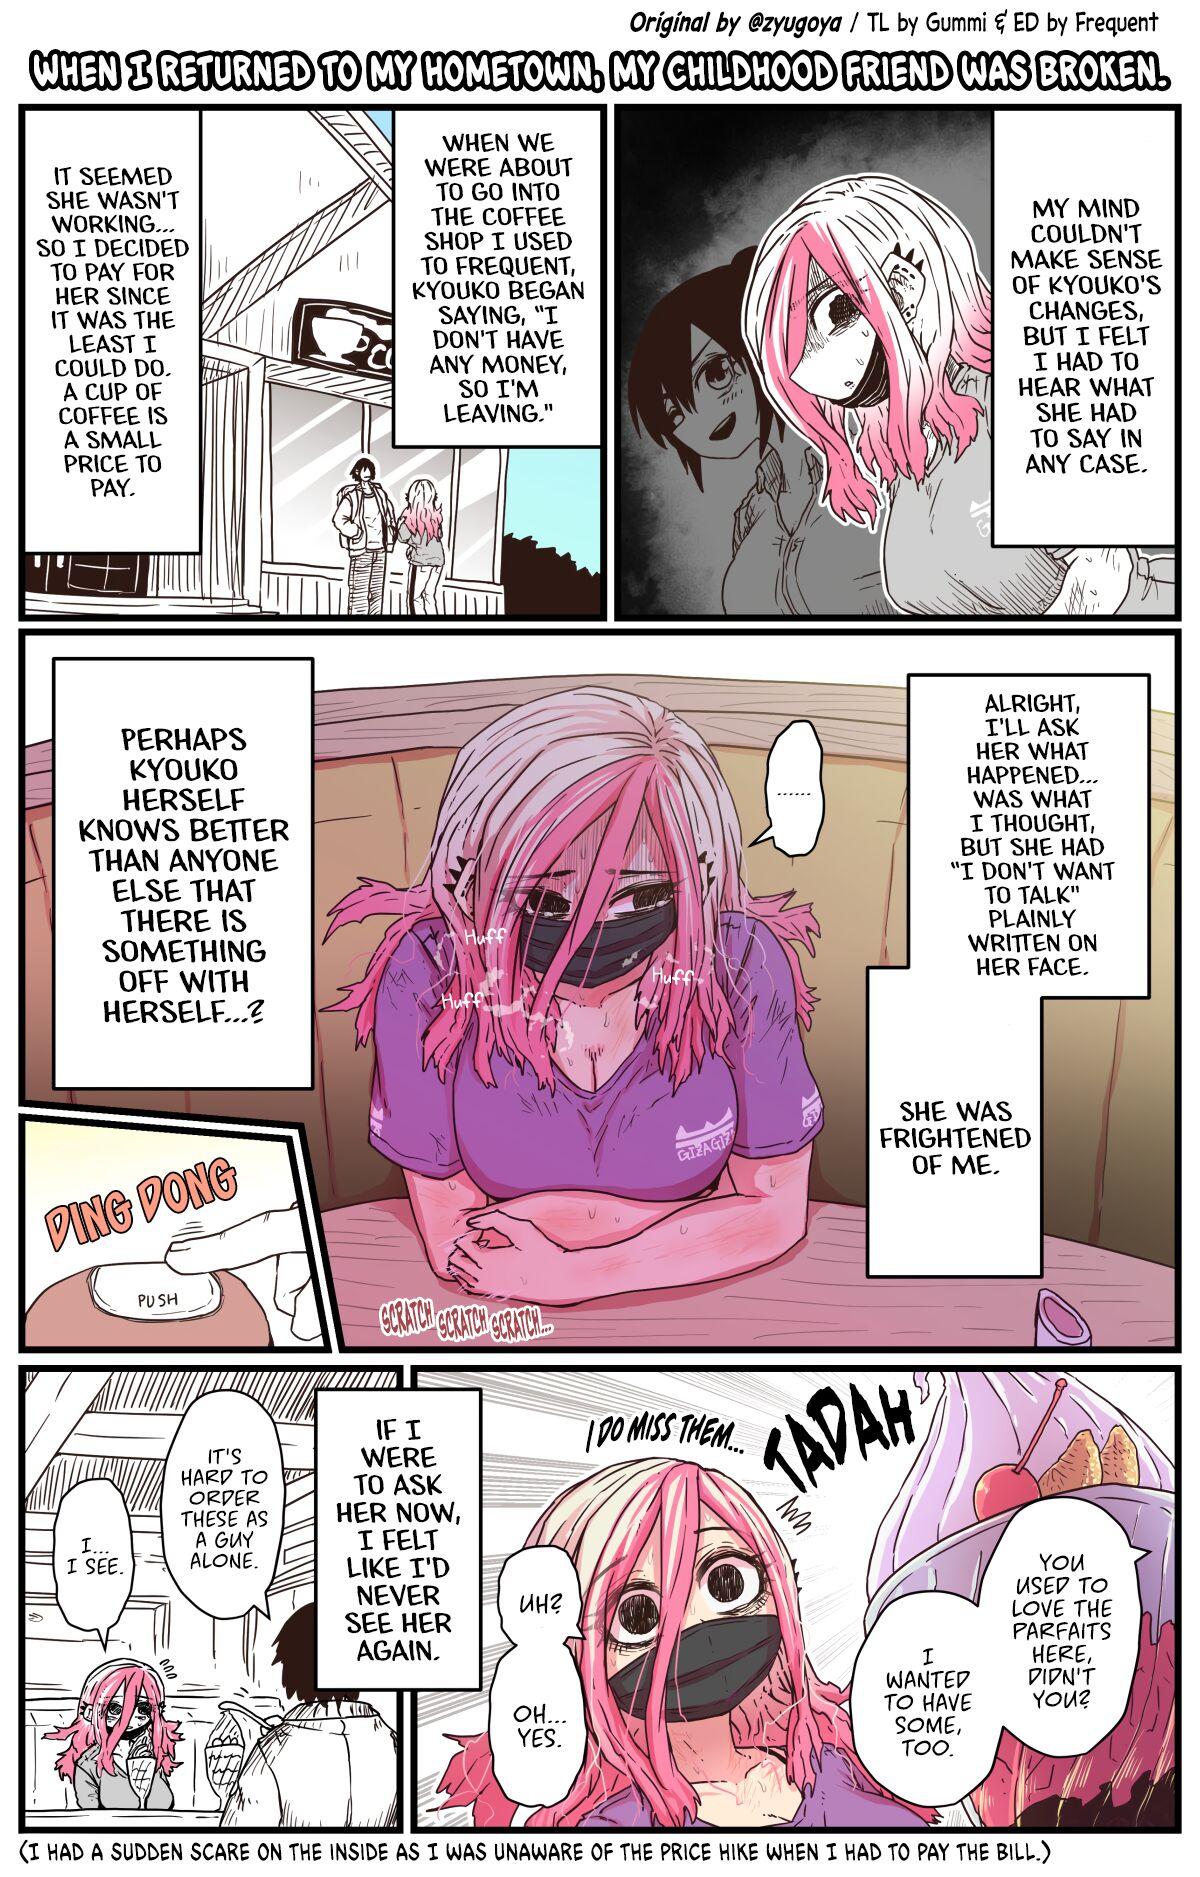 Mmf When I Returned to My Hometown, My Childhood Friend was Broken - Original Amatoriale - Page 4